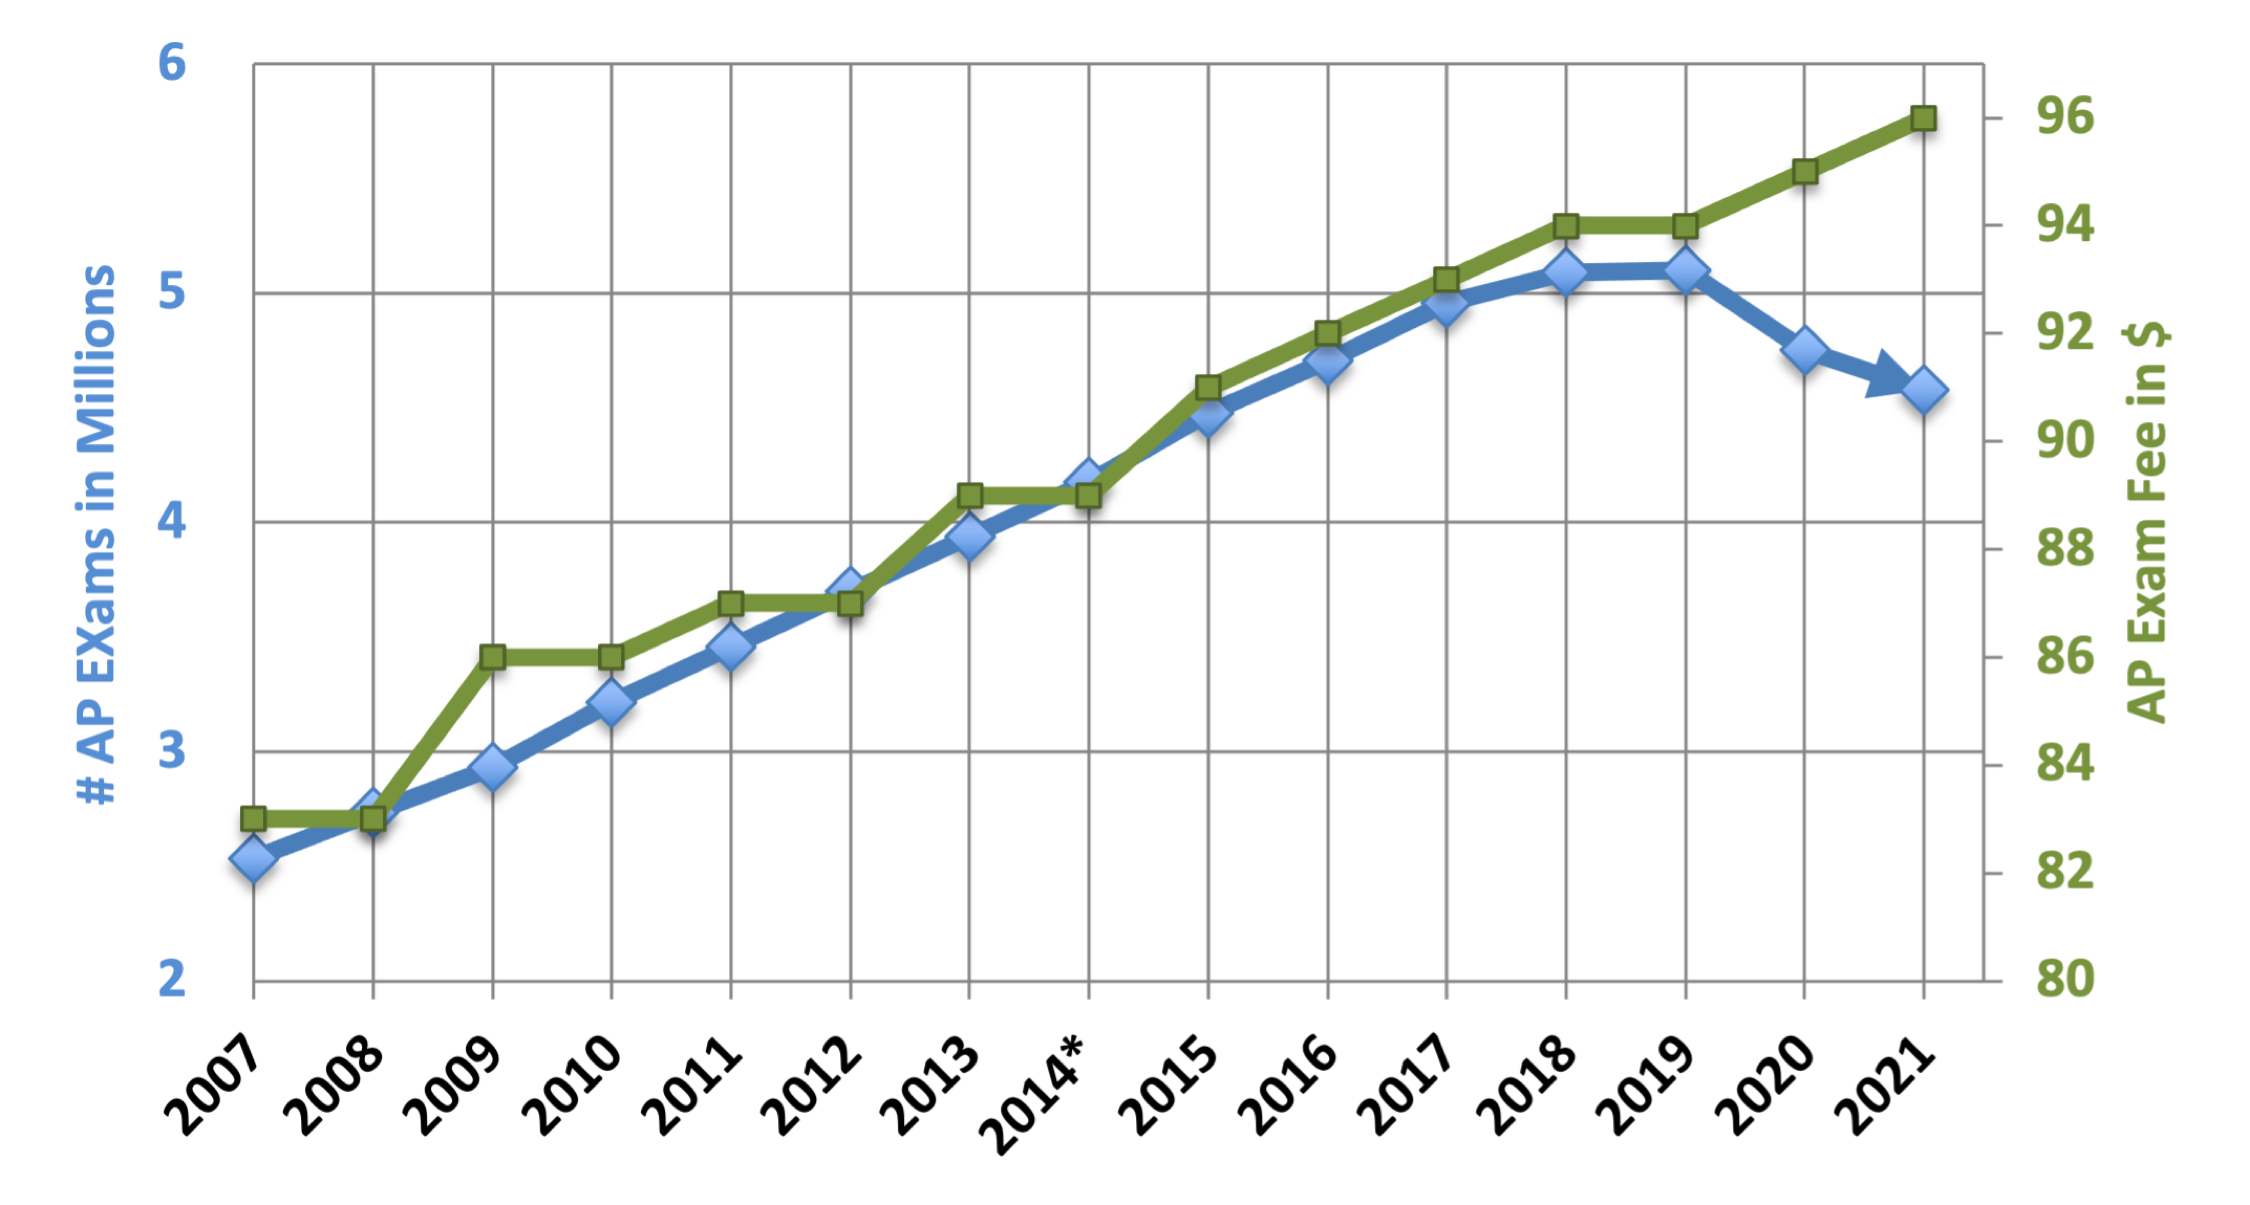 AP Exam Fee History and Number of Exams 2007 to 2019